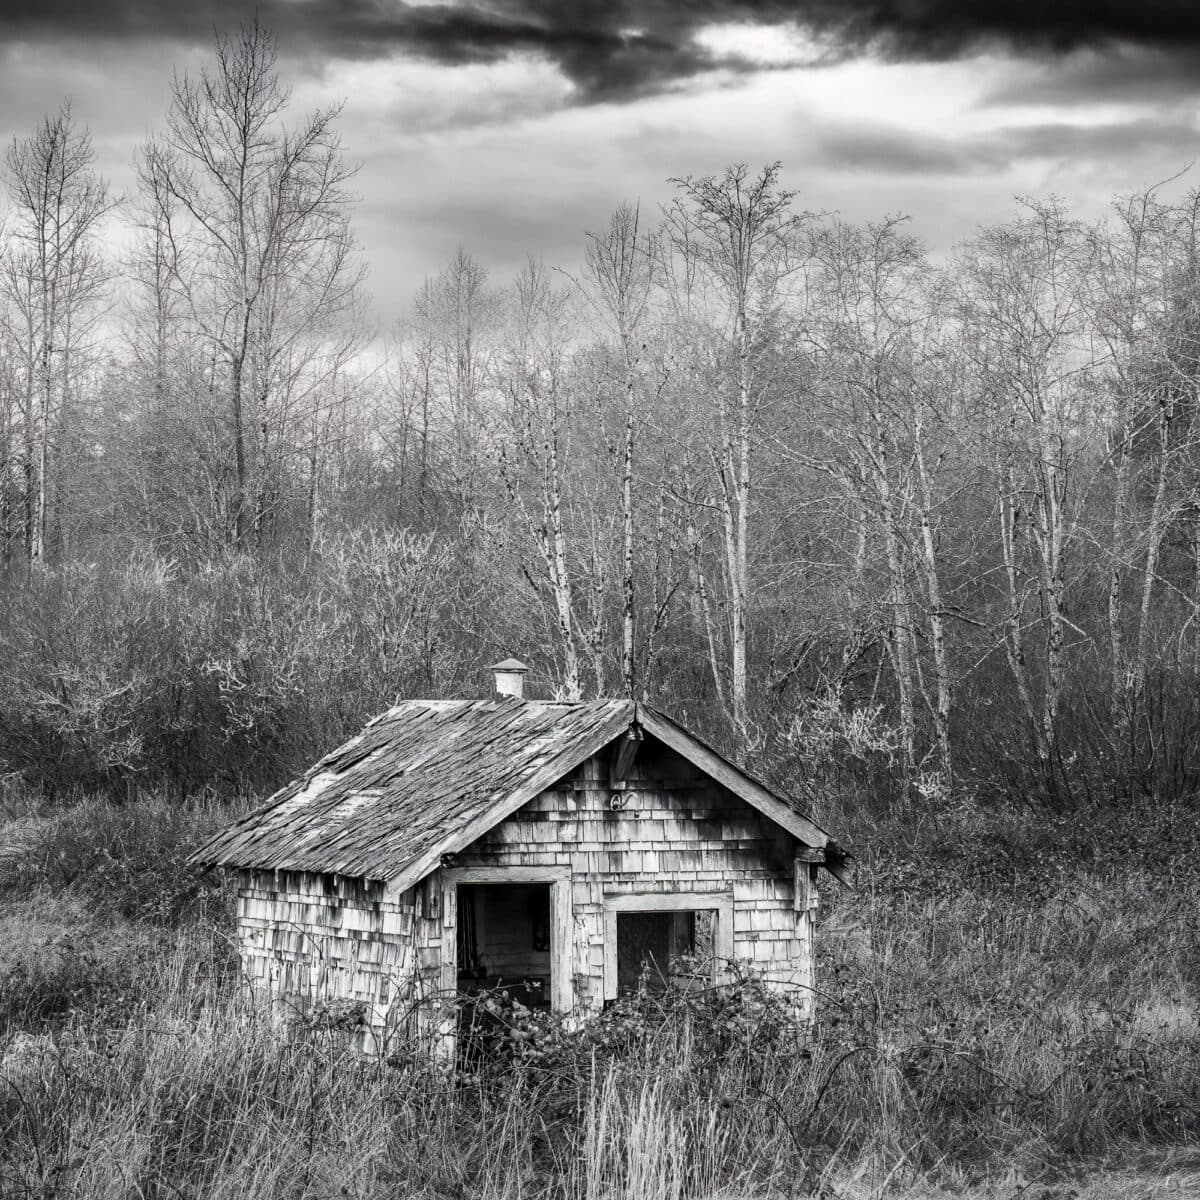 A square black and white rural landscape photograph of an old shingled shed in Grays Harbor County, Washington.